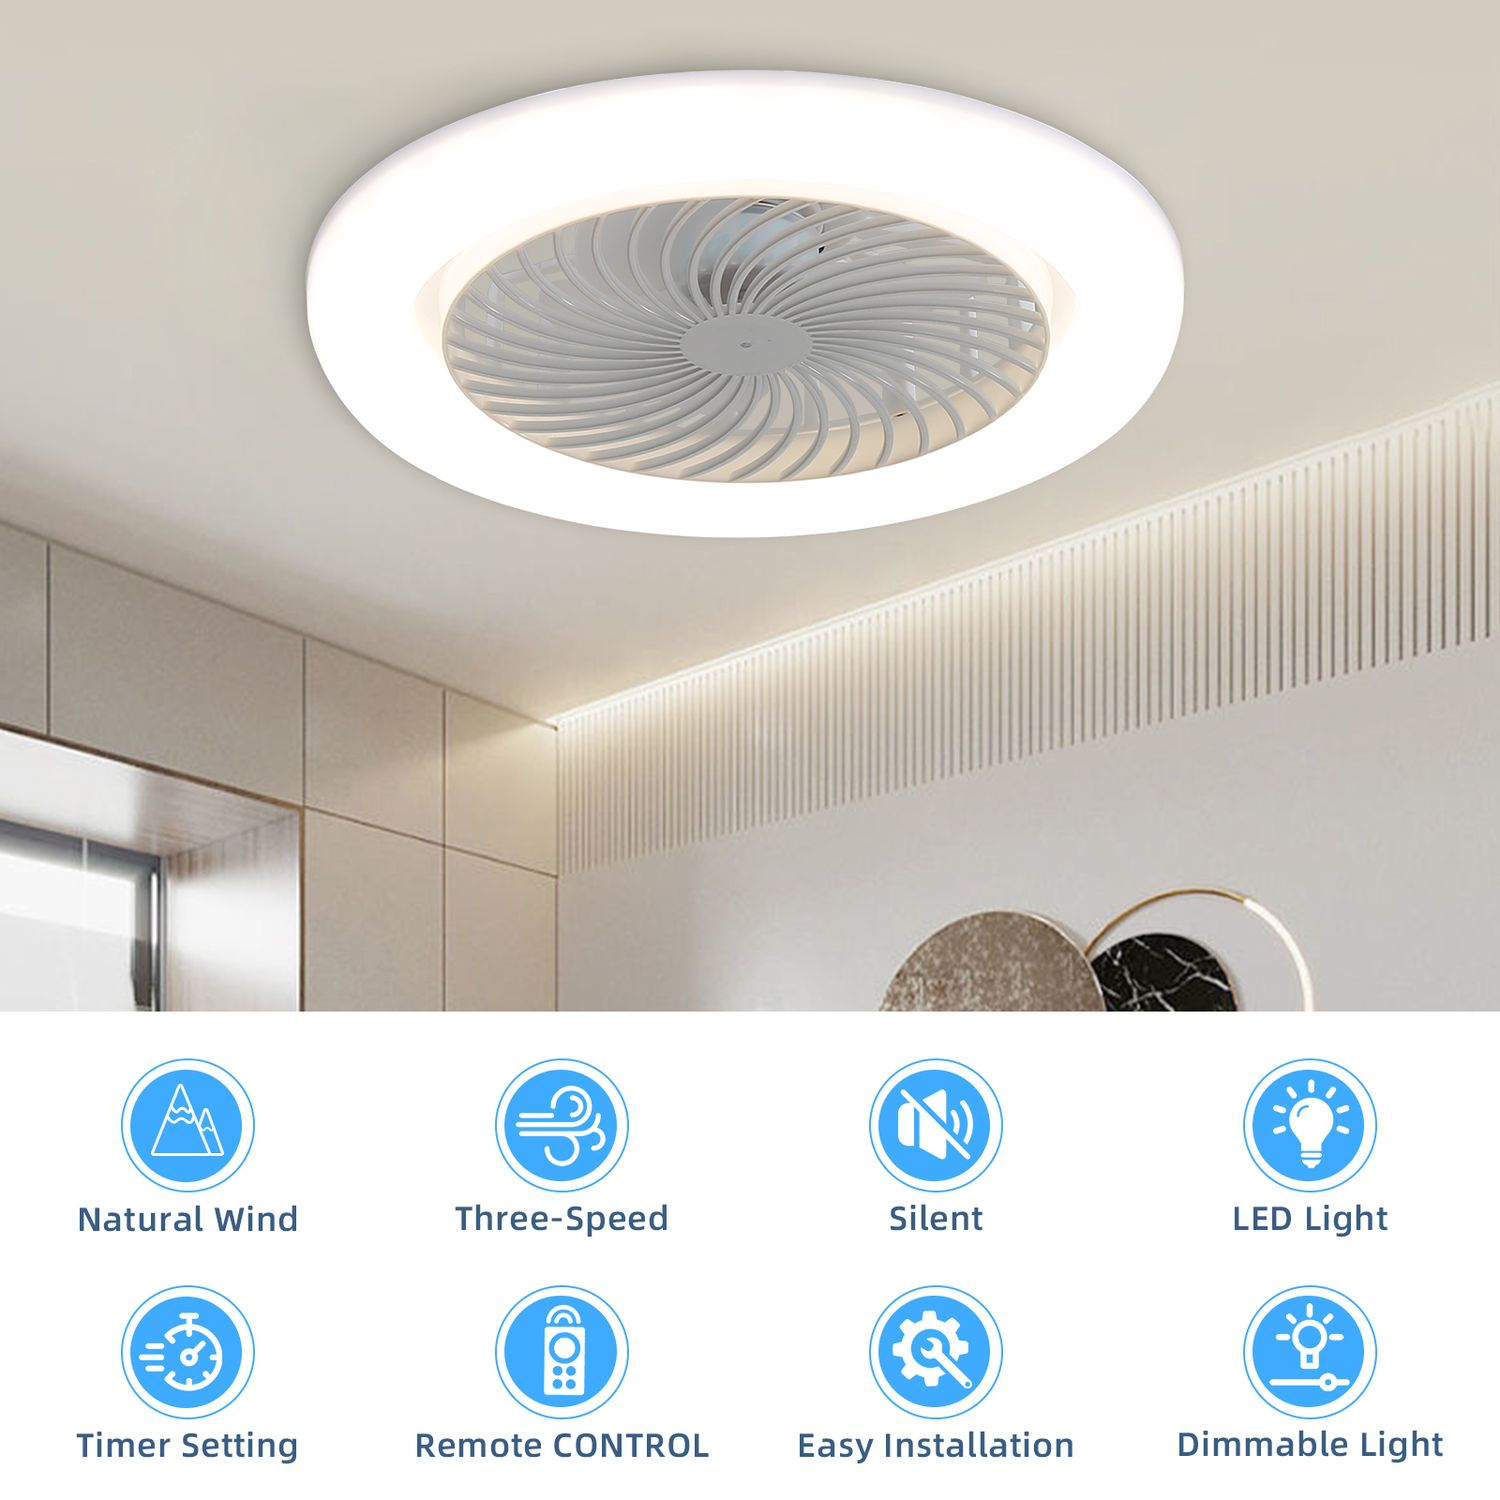 features of Sofucor 10“ Socket Ceiling Fan with Light and Remote: natural wind, three speed, silent, led light, timer setting, remote control, easy installation, dimmable light